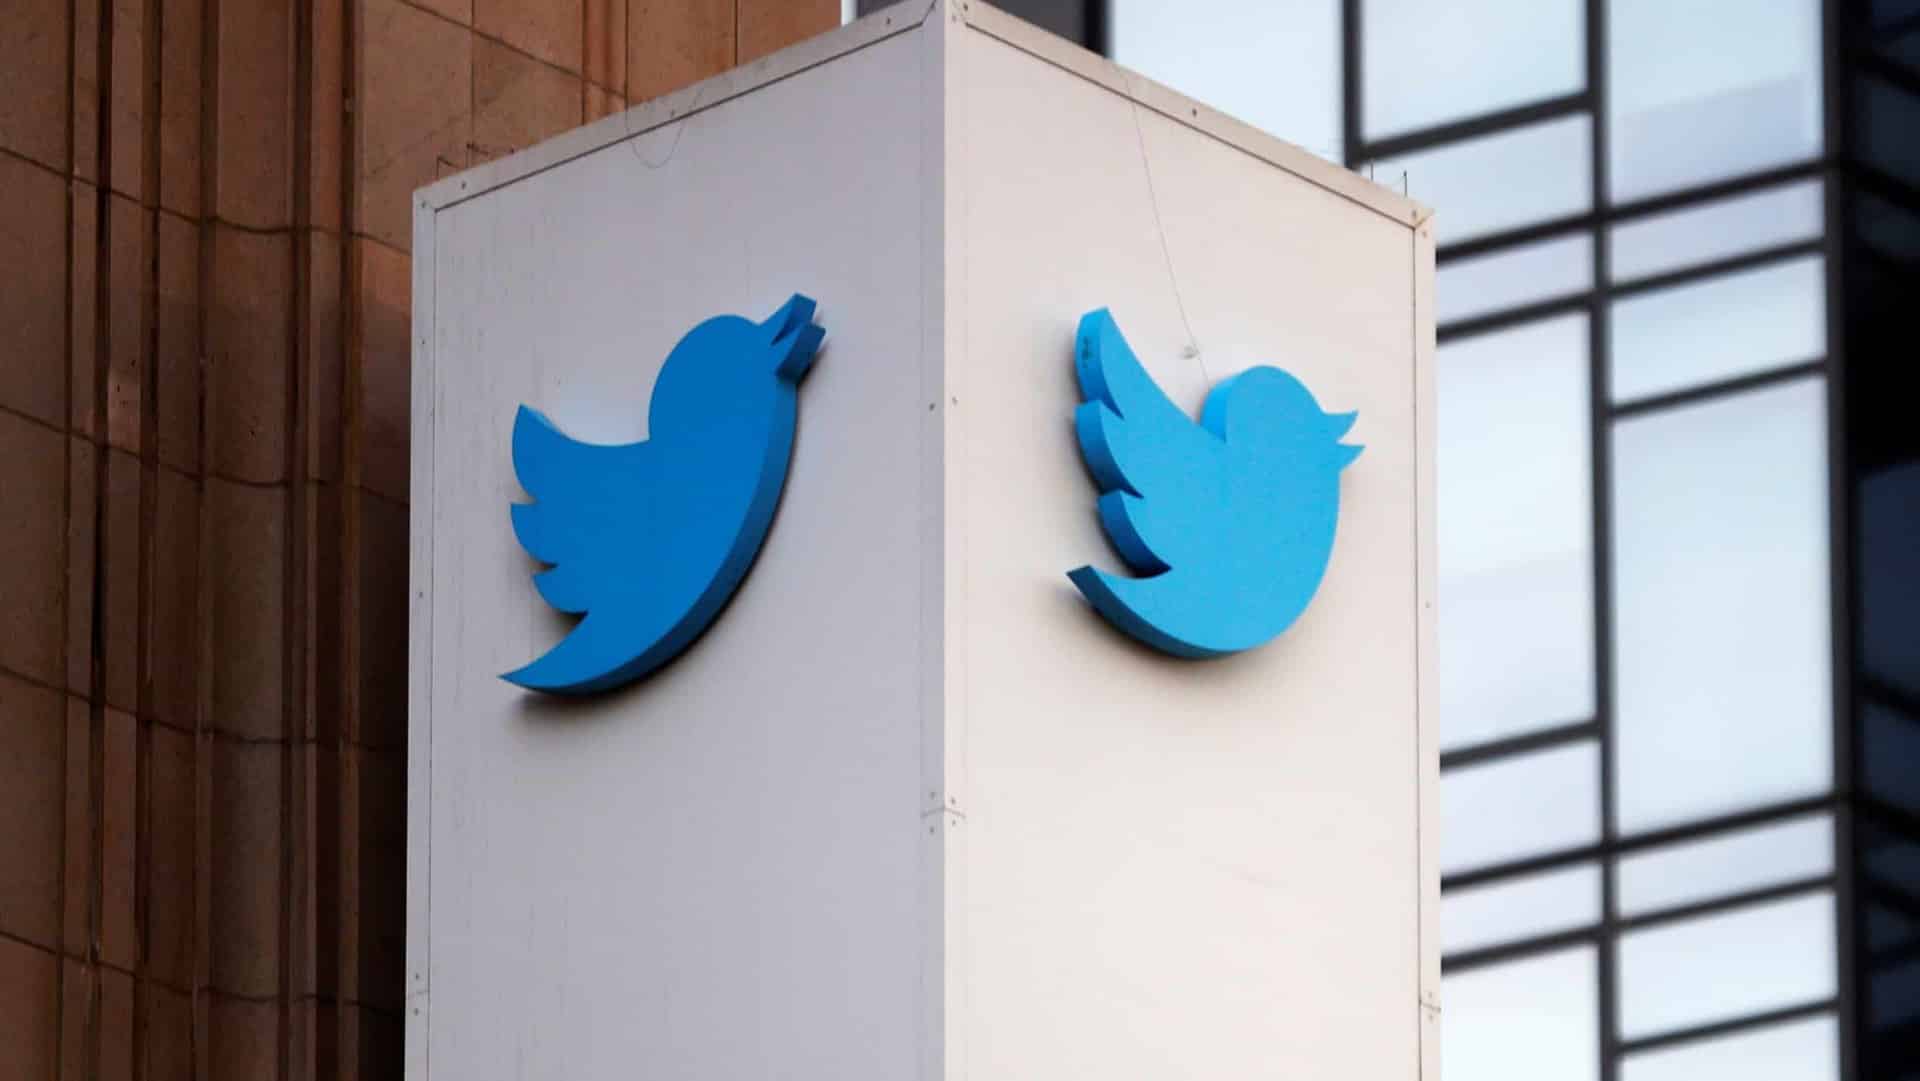 Twitter bans sharing photos, videos of private individuals without consent